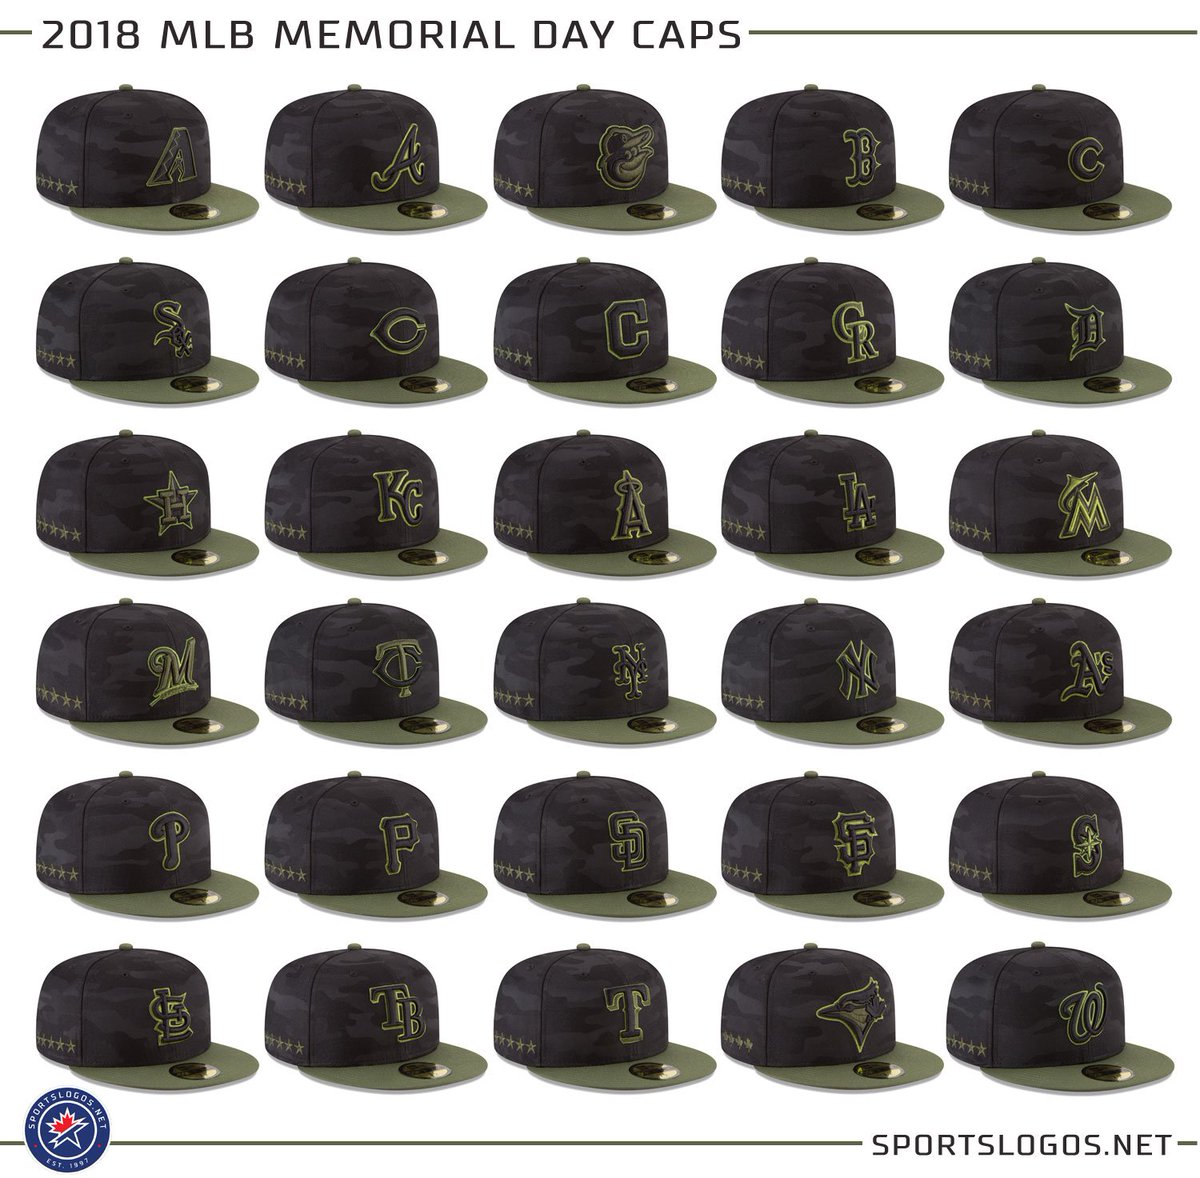 Chris Creamer  SportsLogos.Net on X: Here's the uniform matchup for that Blue  Jays v. Rays Memorial Day game, Jays wearing the CADPAT camo, Rays in USMC:   / X